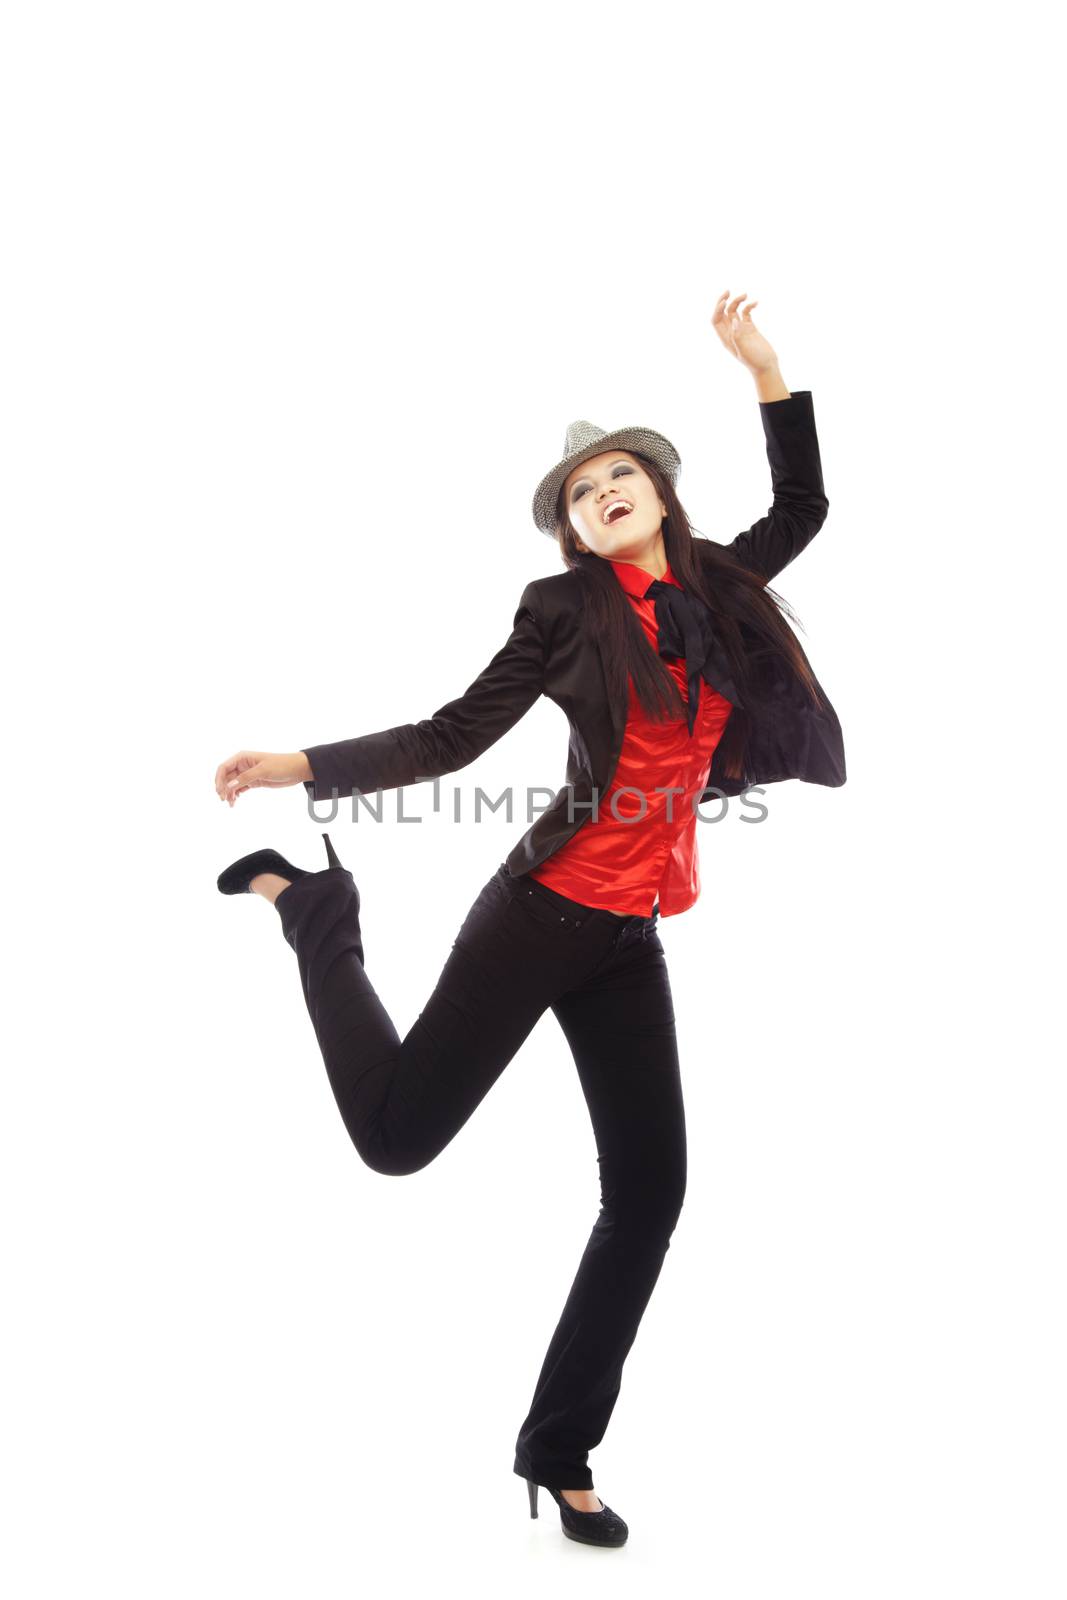 Elegant lady in the black costume jumping on a white background